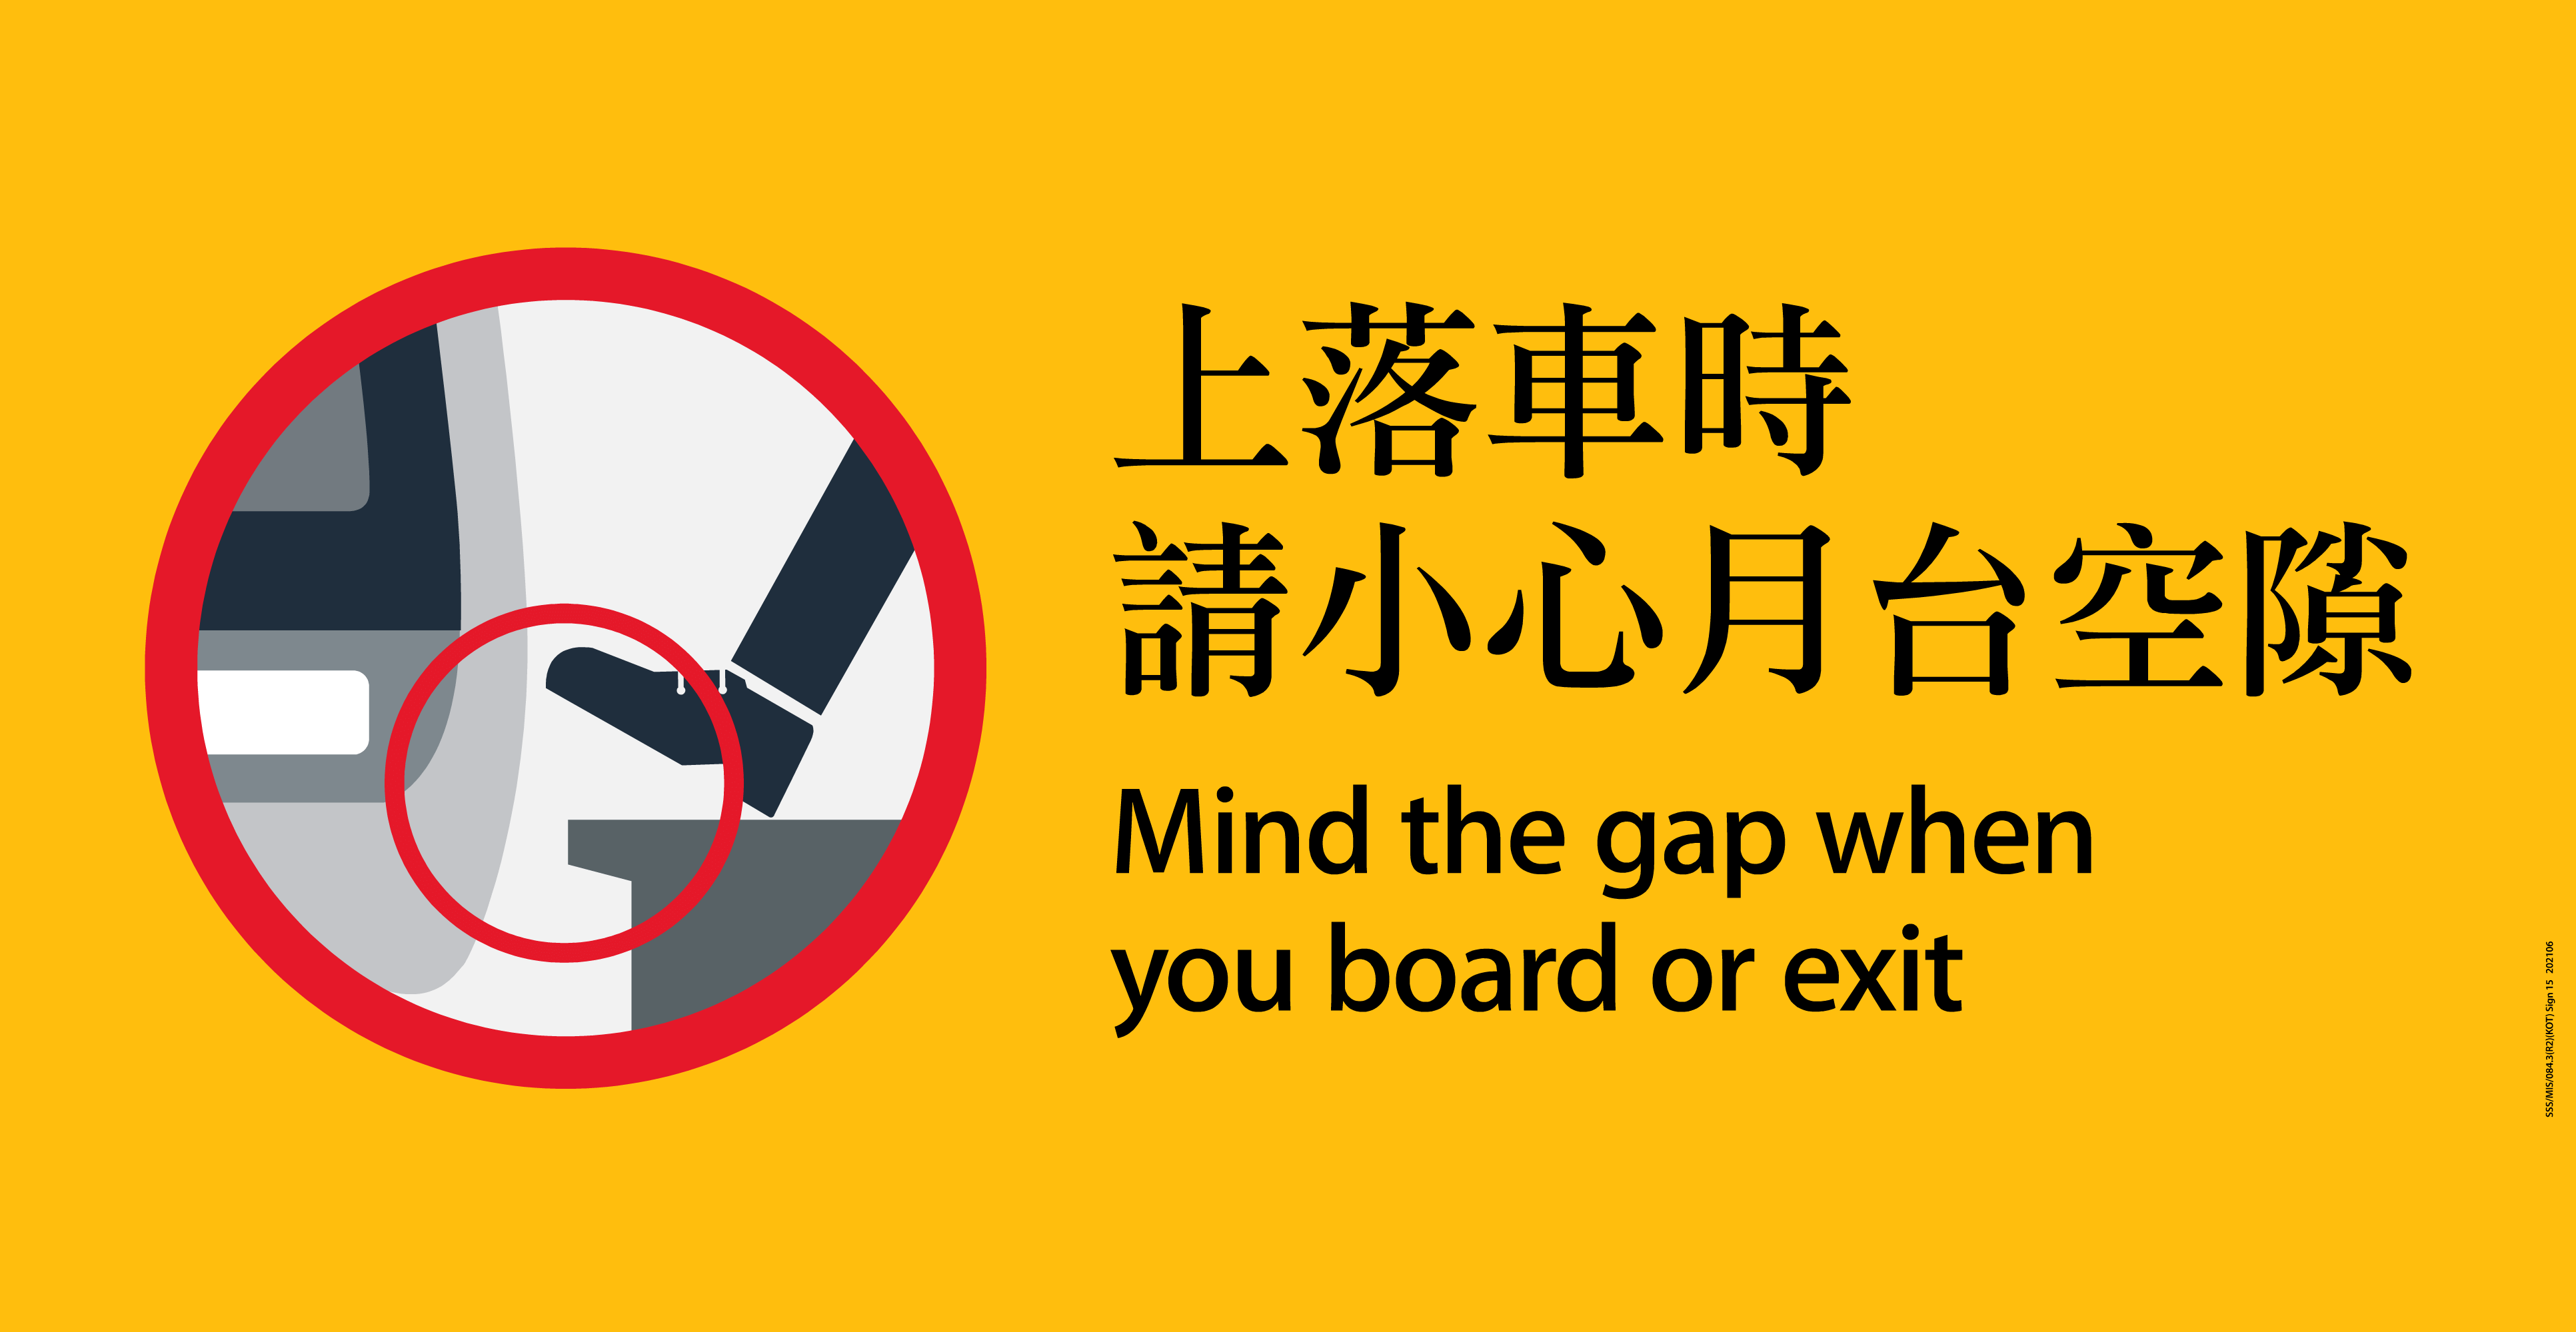 MTR Sticker: Mind the gap when you board or exit